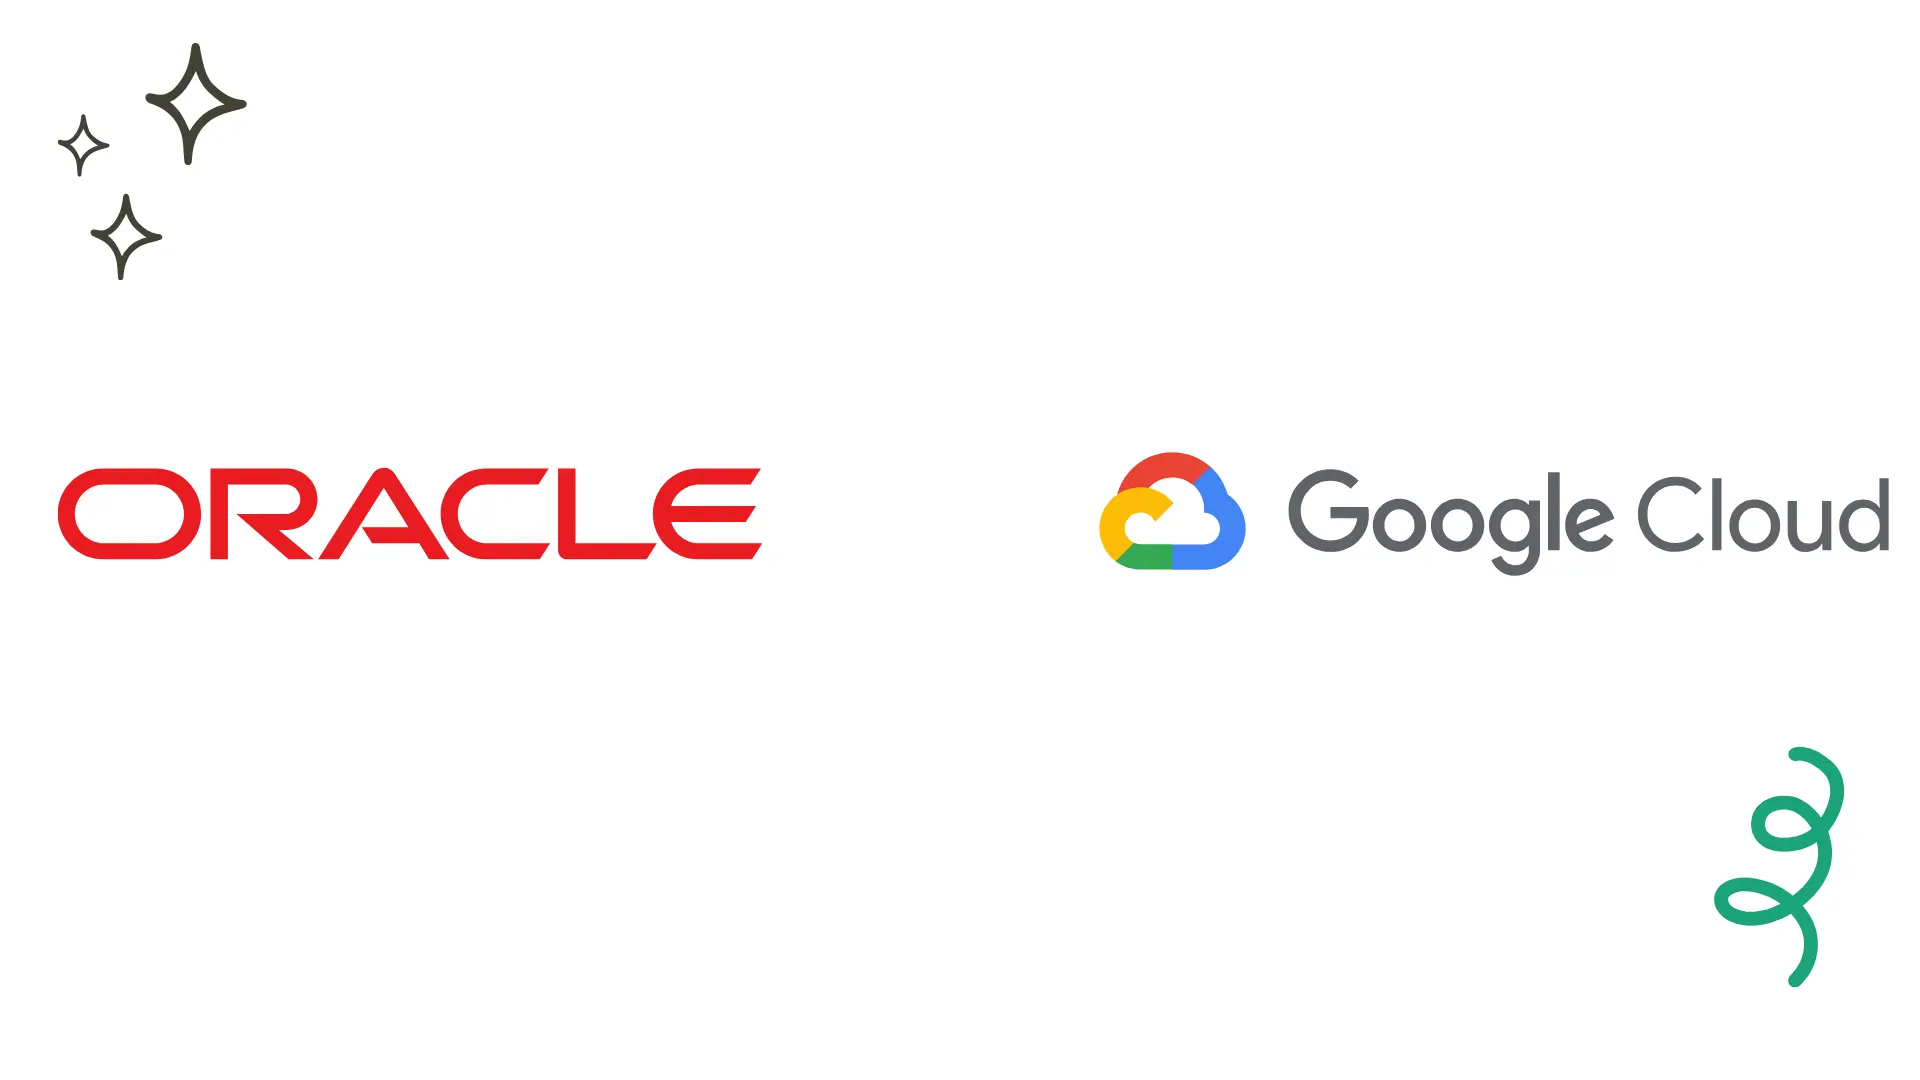 Oracle and Google (our free tier hero)